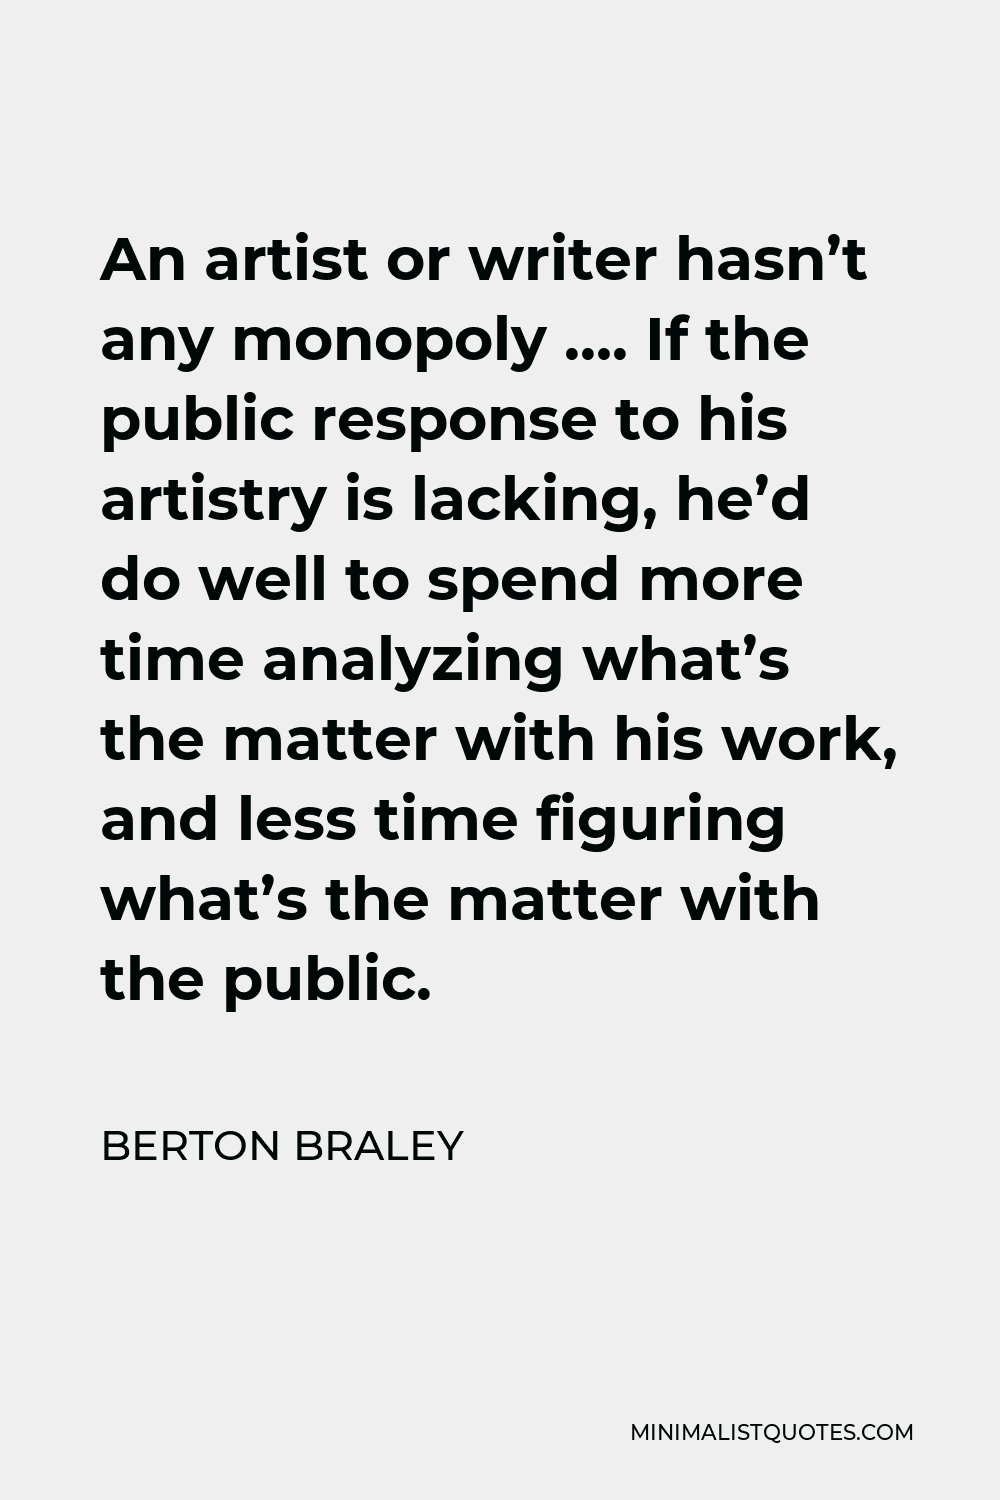 Berton Braley Quote - An artist or writer hasn’t any monopoly …. If the public response to his artistry is lacking, he’d do well to spend more time analyzing what’s the matter with his work, and less time figuring what’s the matter with the public.